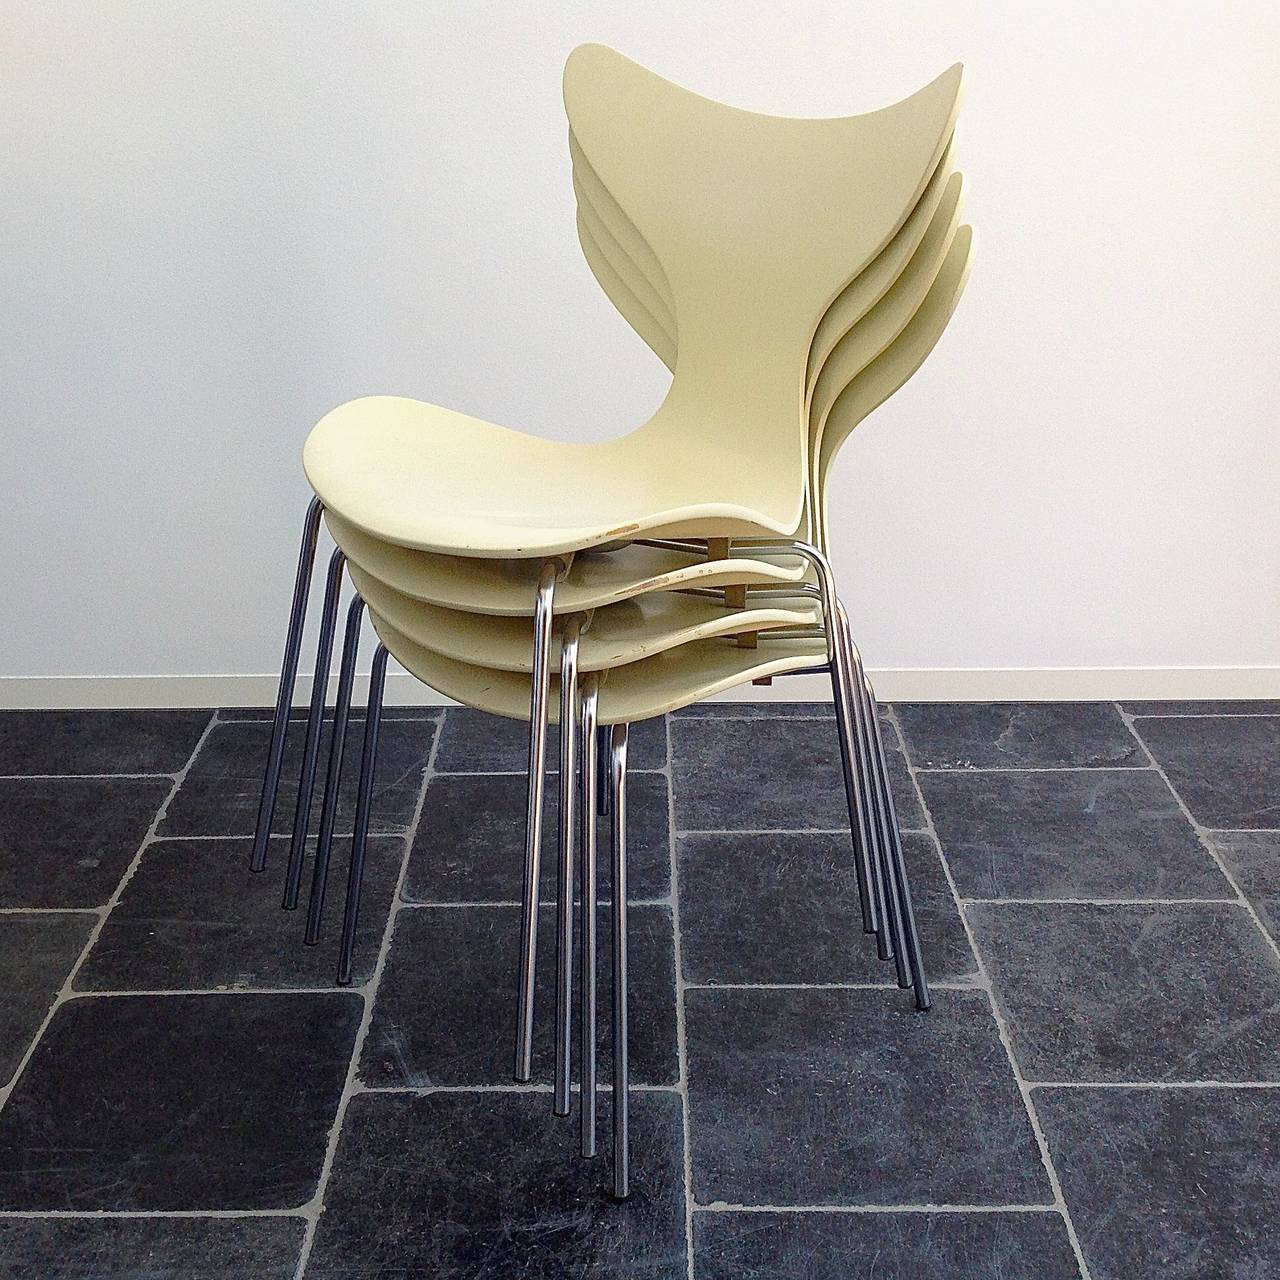 Set of 4 Seagull Chairs by Arne Jacobsen for Fritz Hansen, in original condition 1